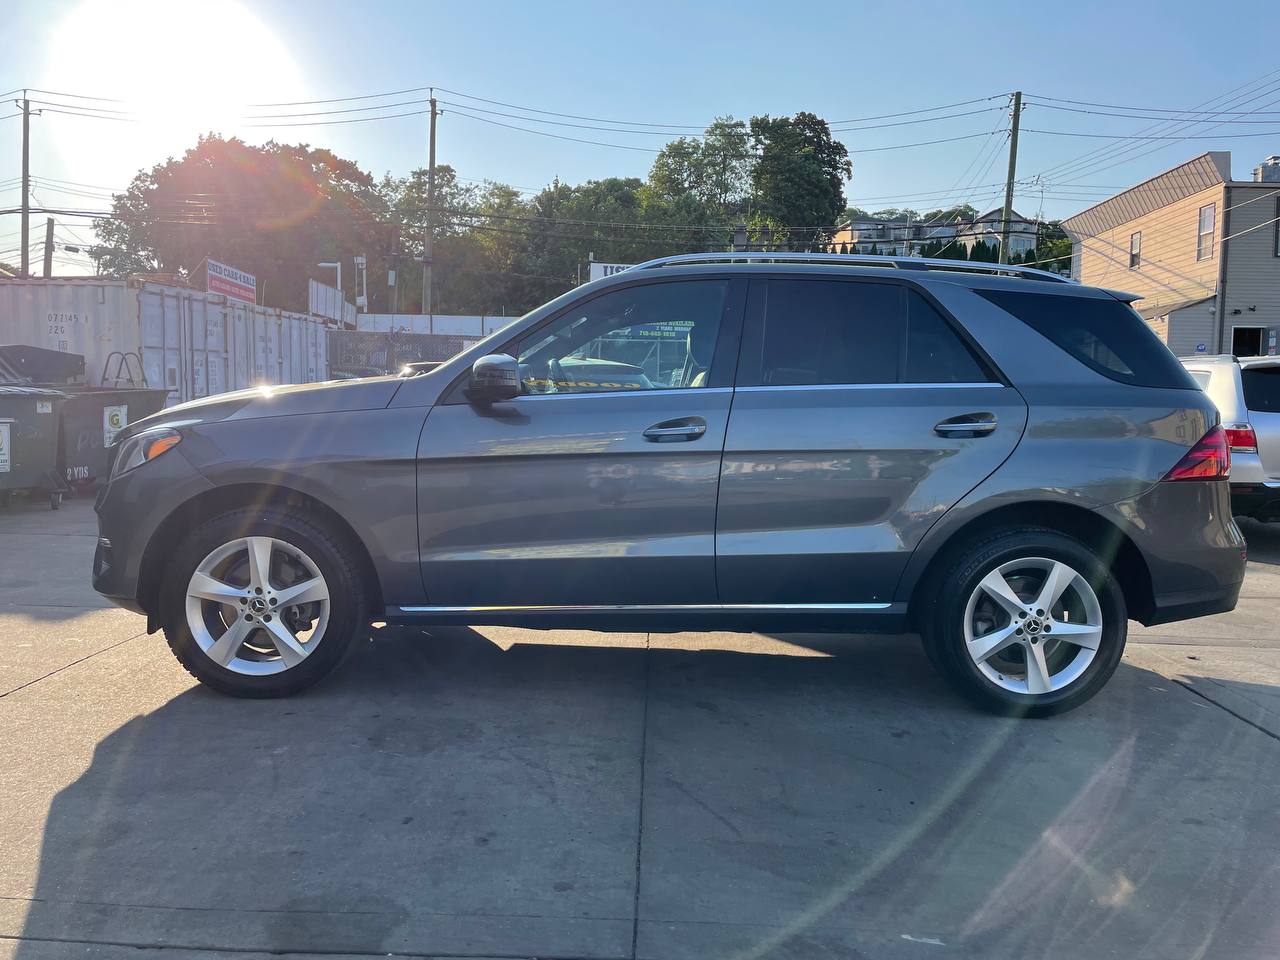 Used - Mercedes-Benz GLE 350 SUV for sale in Staten Island NY